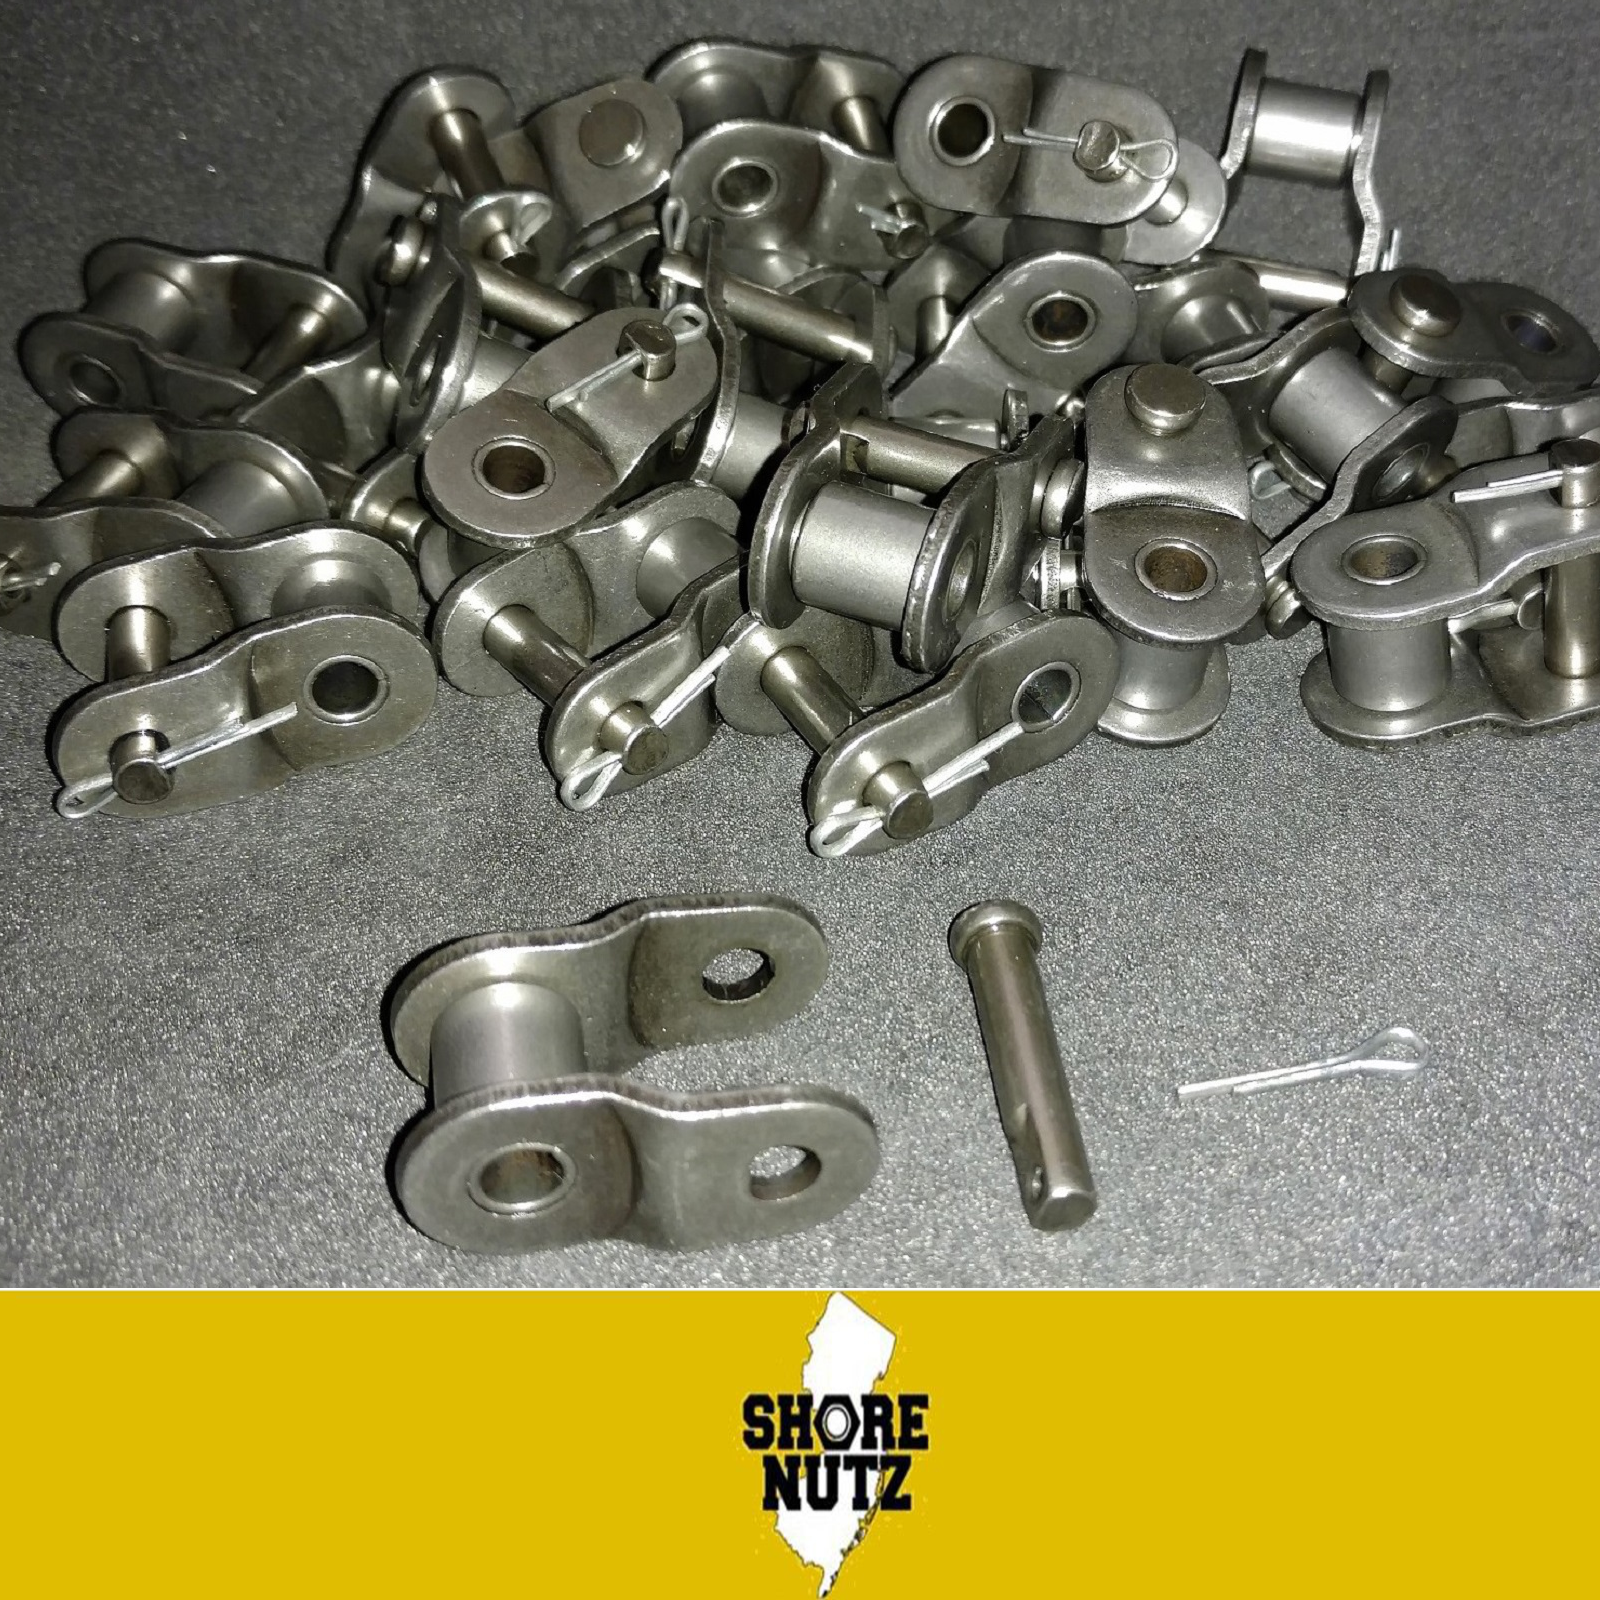 #35 Chain Offset Link Qty 10 Pieces Half Link 3/8" Pitch 35o/l